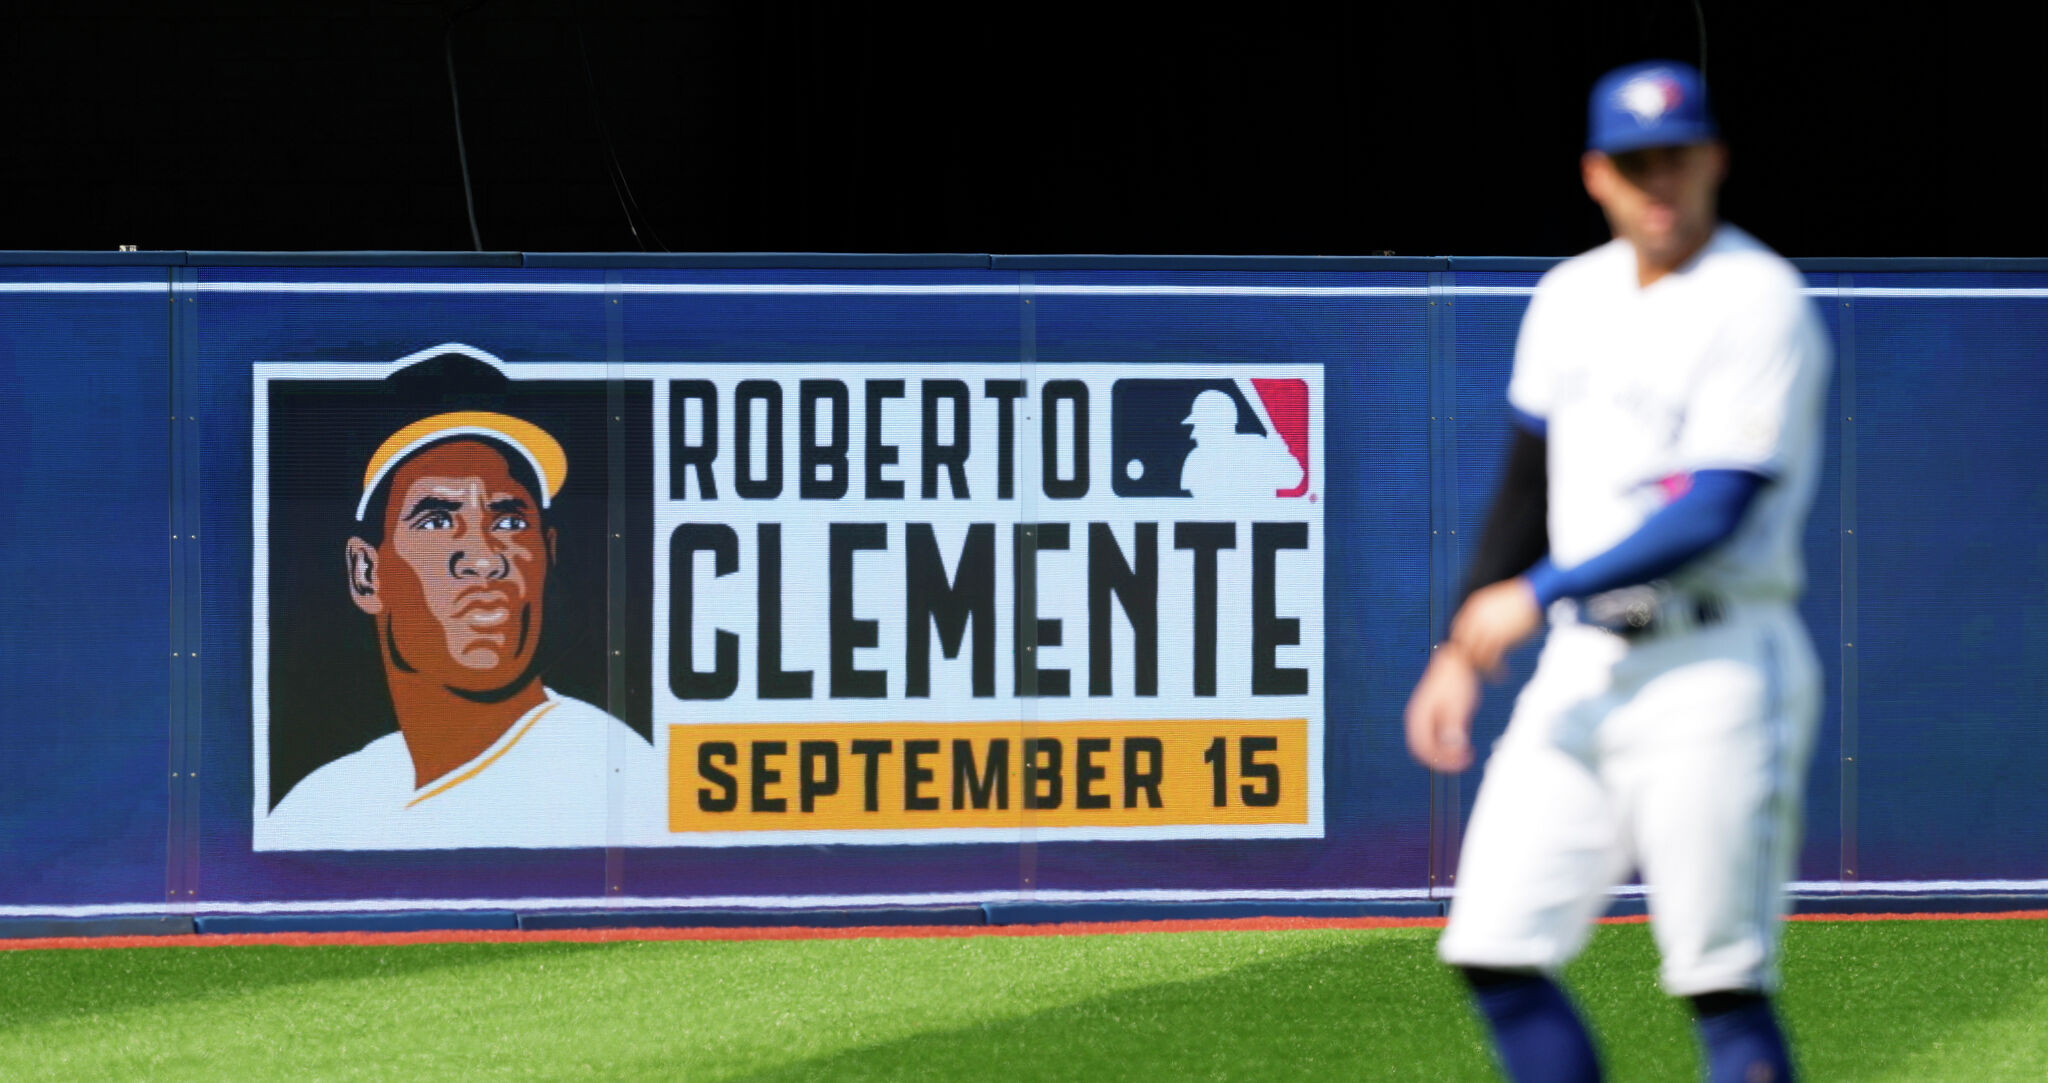 Newspapers.com - Pittsburgh Pirates right fielder Roberto Clemente